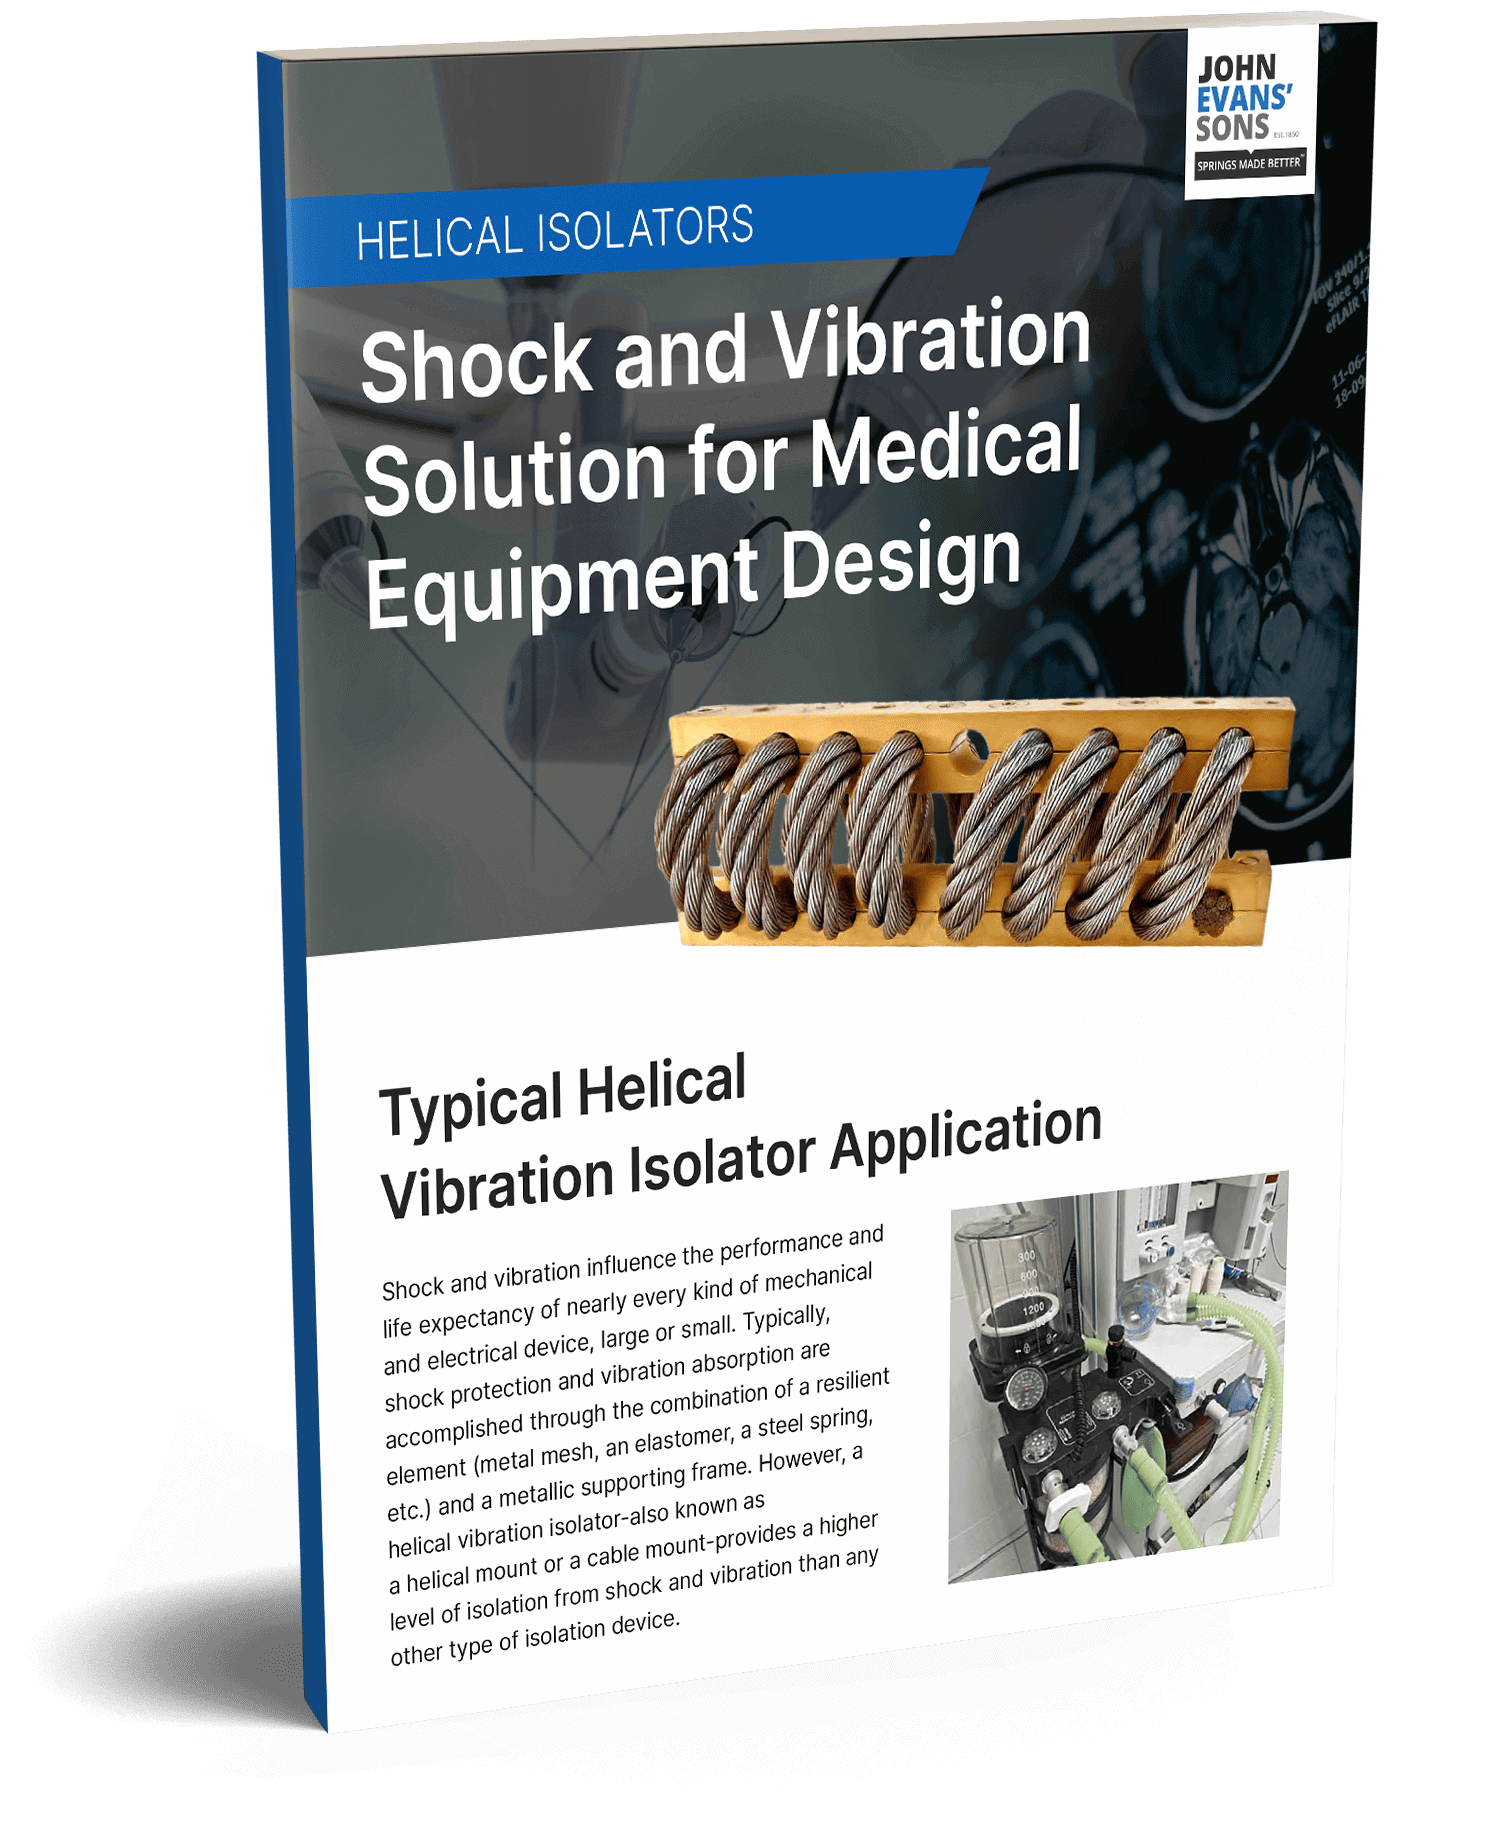 Helical Isolators: Shock and Vibration Solution for Medical Equipment Design